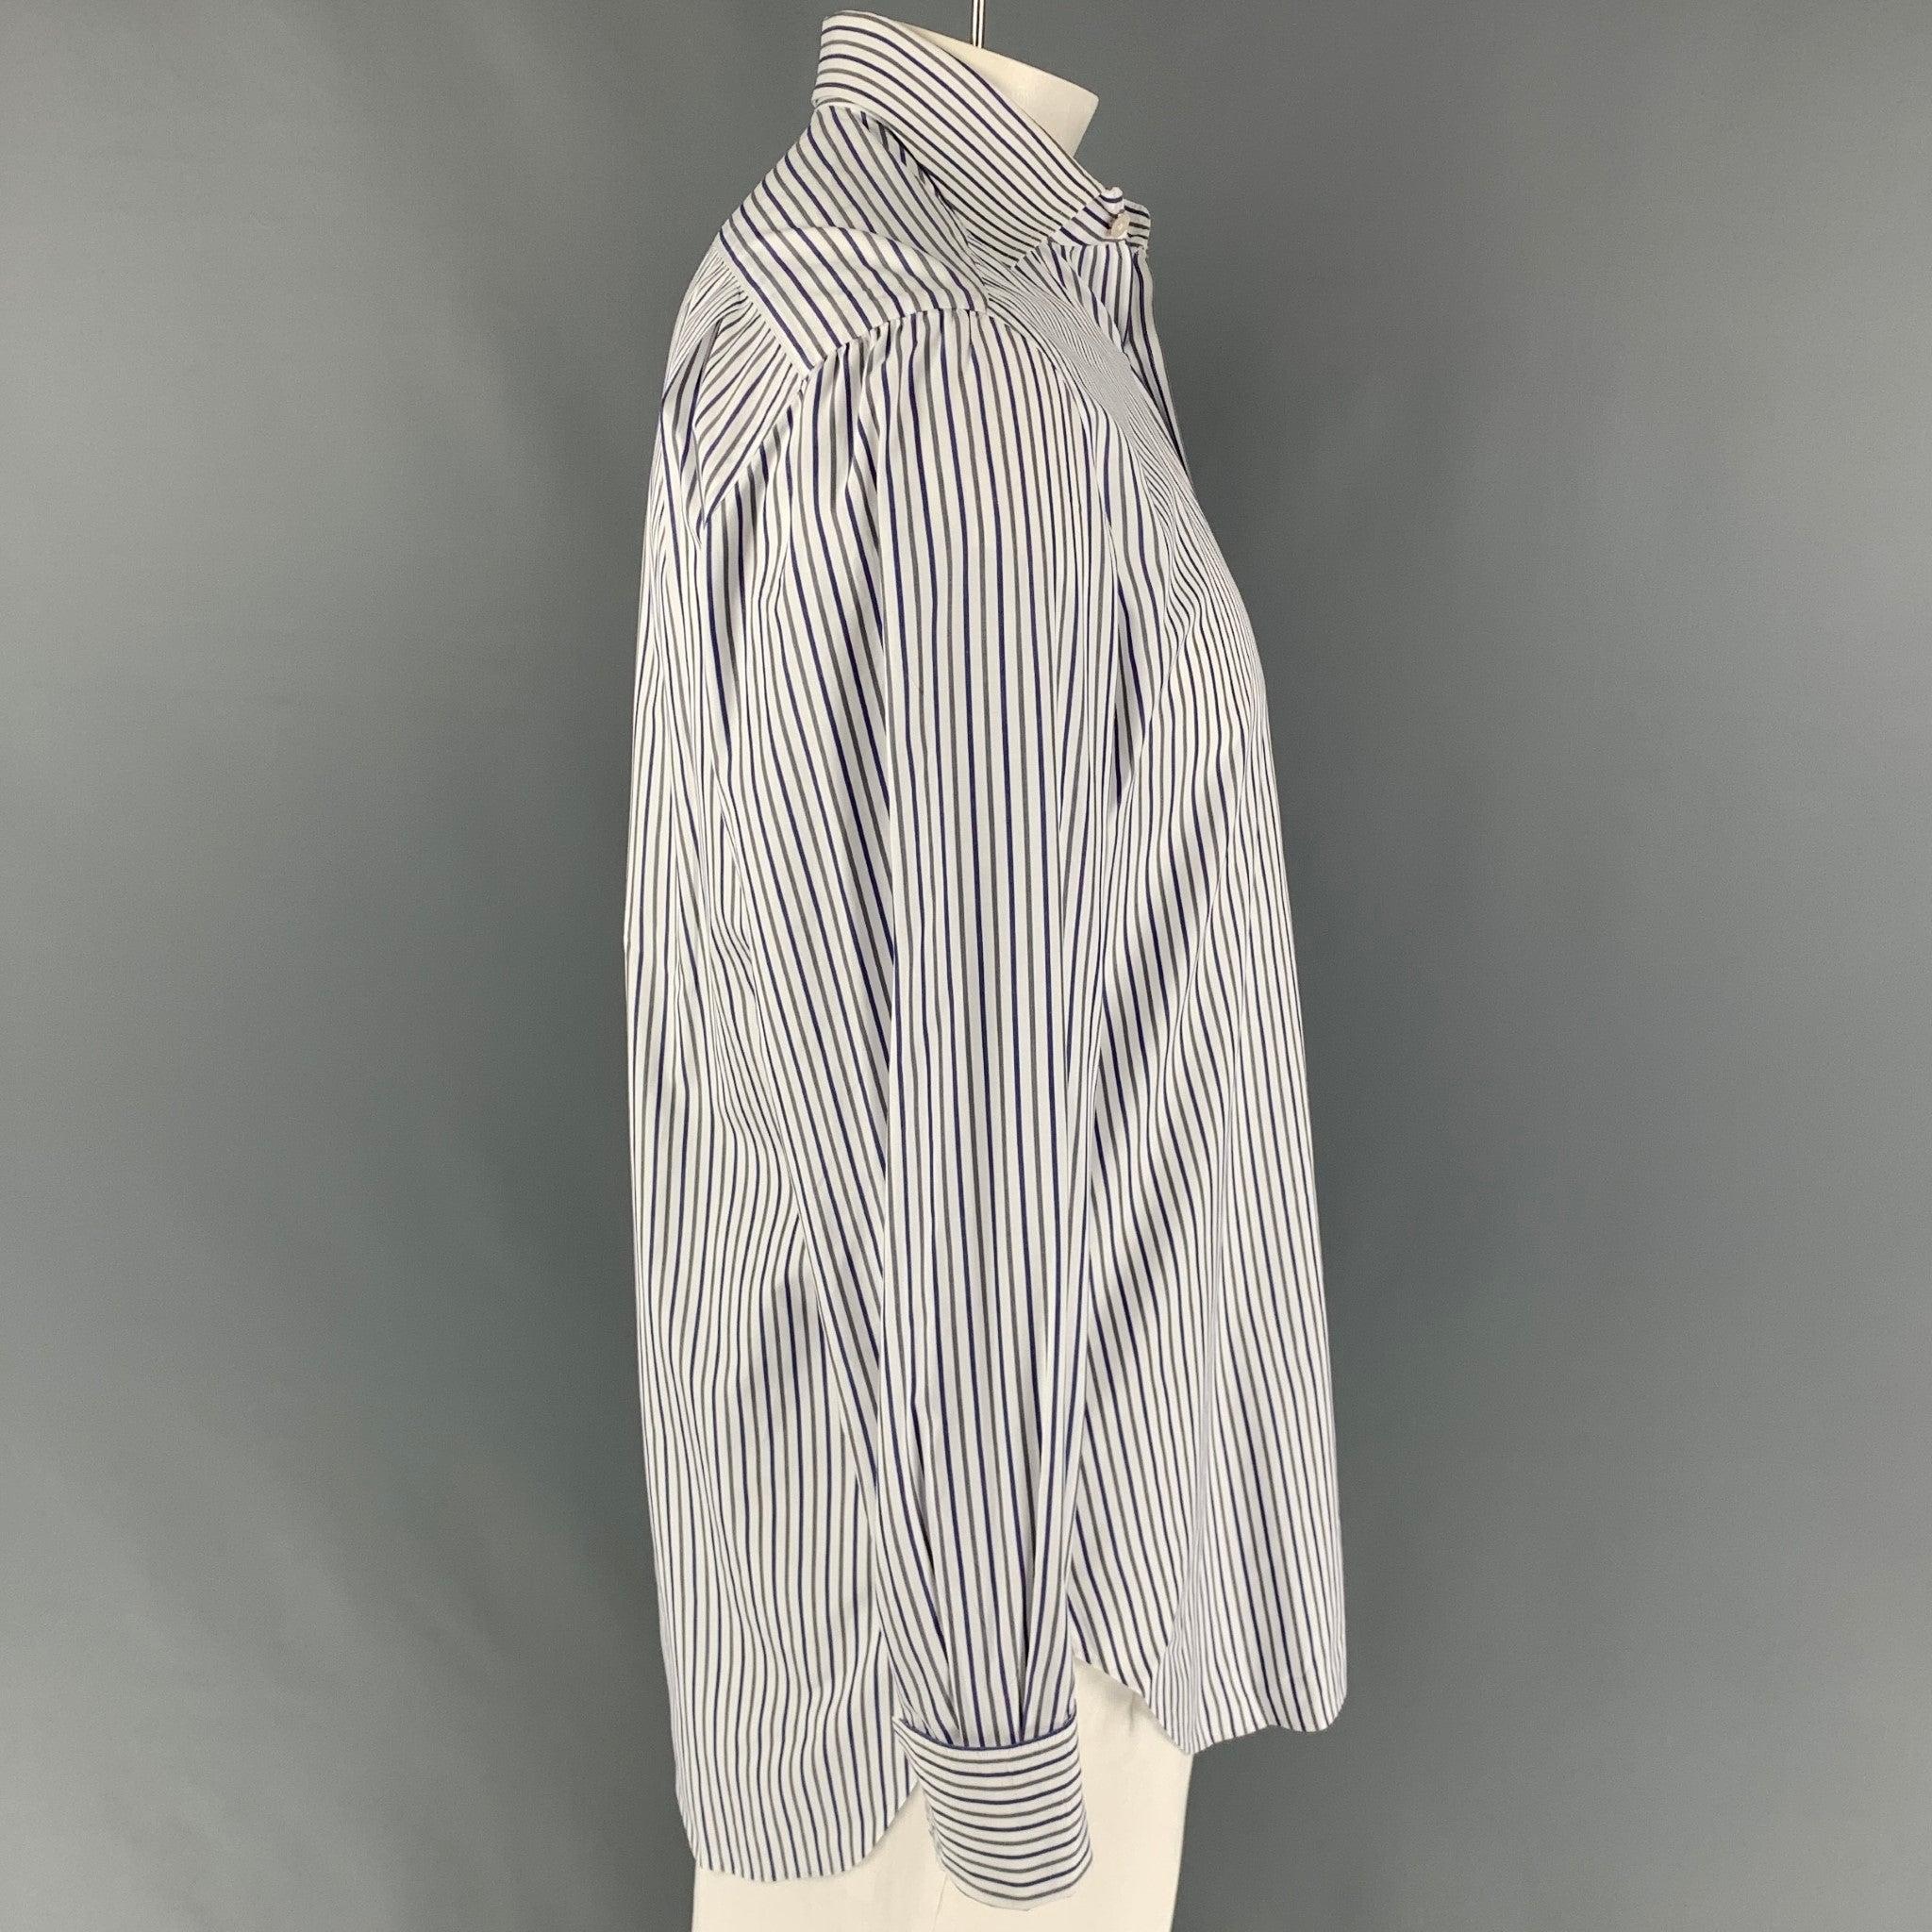 KITON long sleeve shirt comes in a white & blue stripe cotton featuring a spread collar, patch pocket, french cuffs, and a button up closure. Cufflinks not included. Made in Italy.
Very Good
Pre-Owned Condition.  

Marked:   15.5/39 

Measurements: